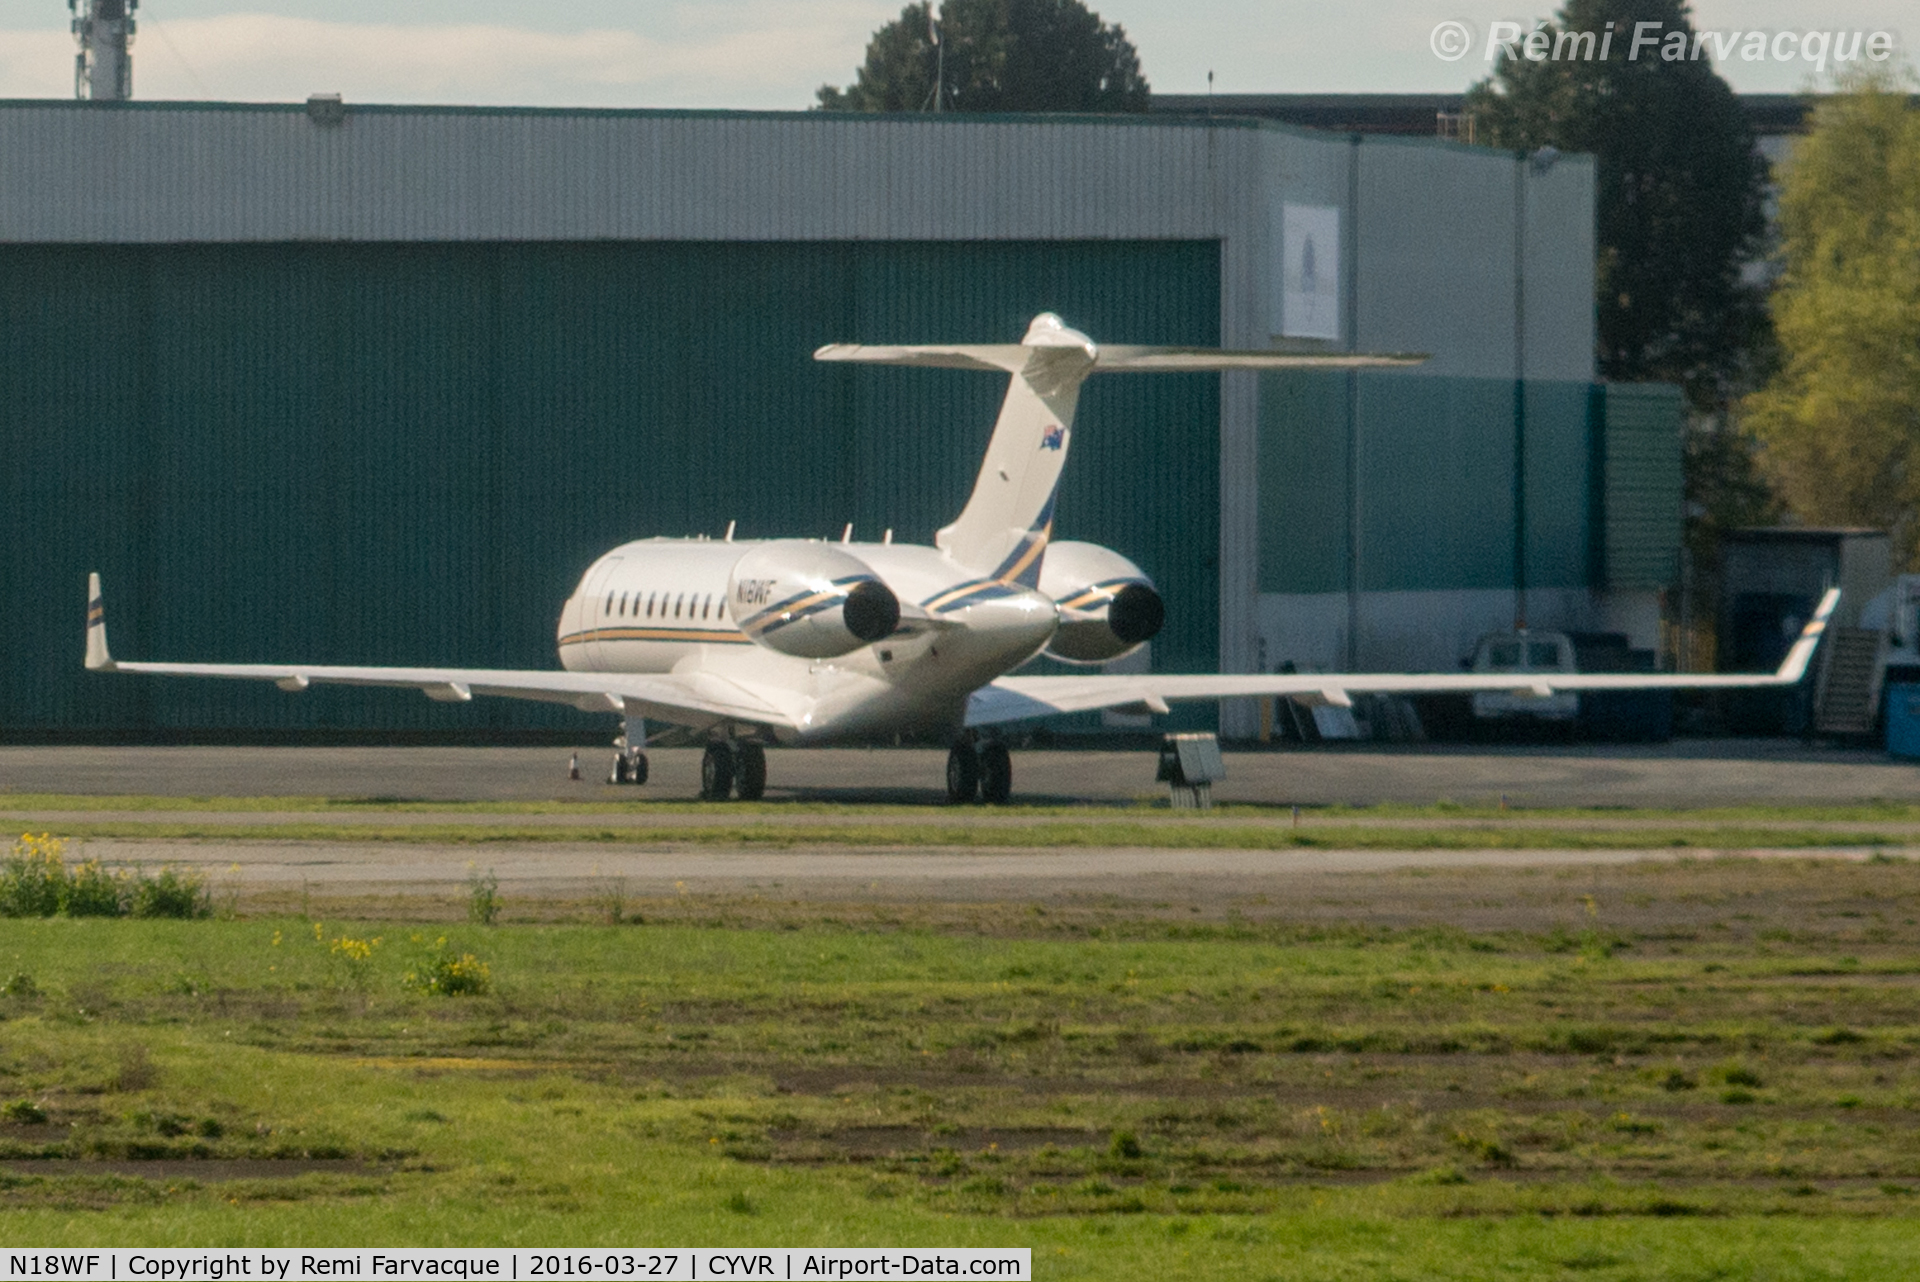 N18WF, 2006 Bombardier BD-700-1A10 Global Express XRS C/N 9215, Parked outside Million Air hanger.